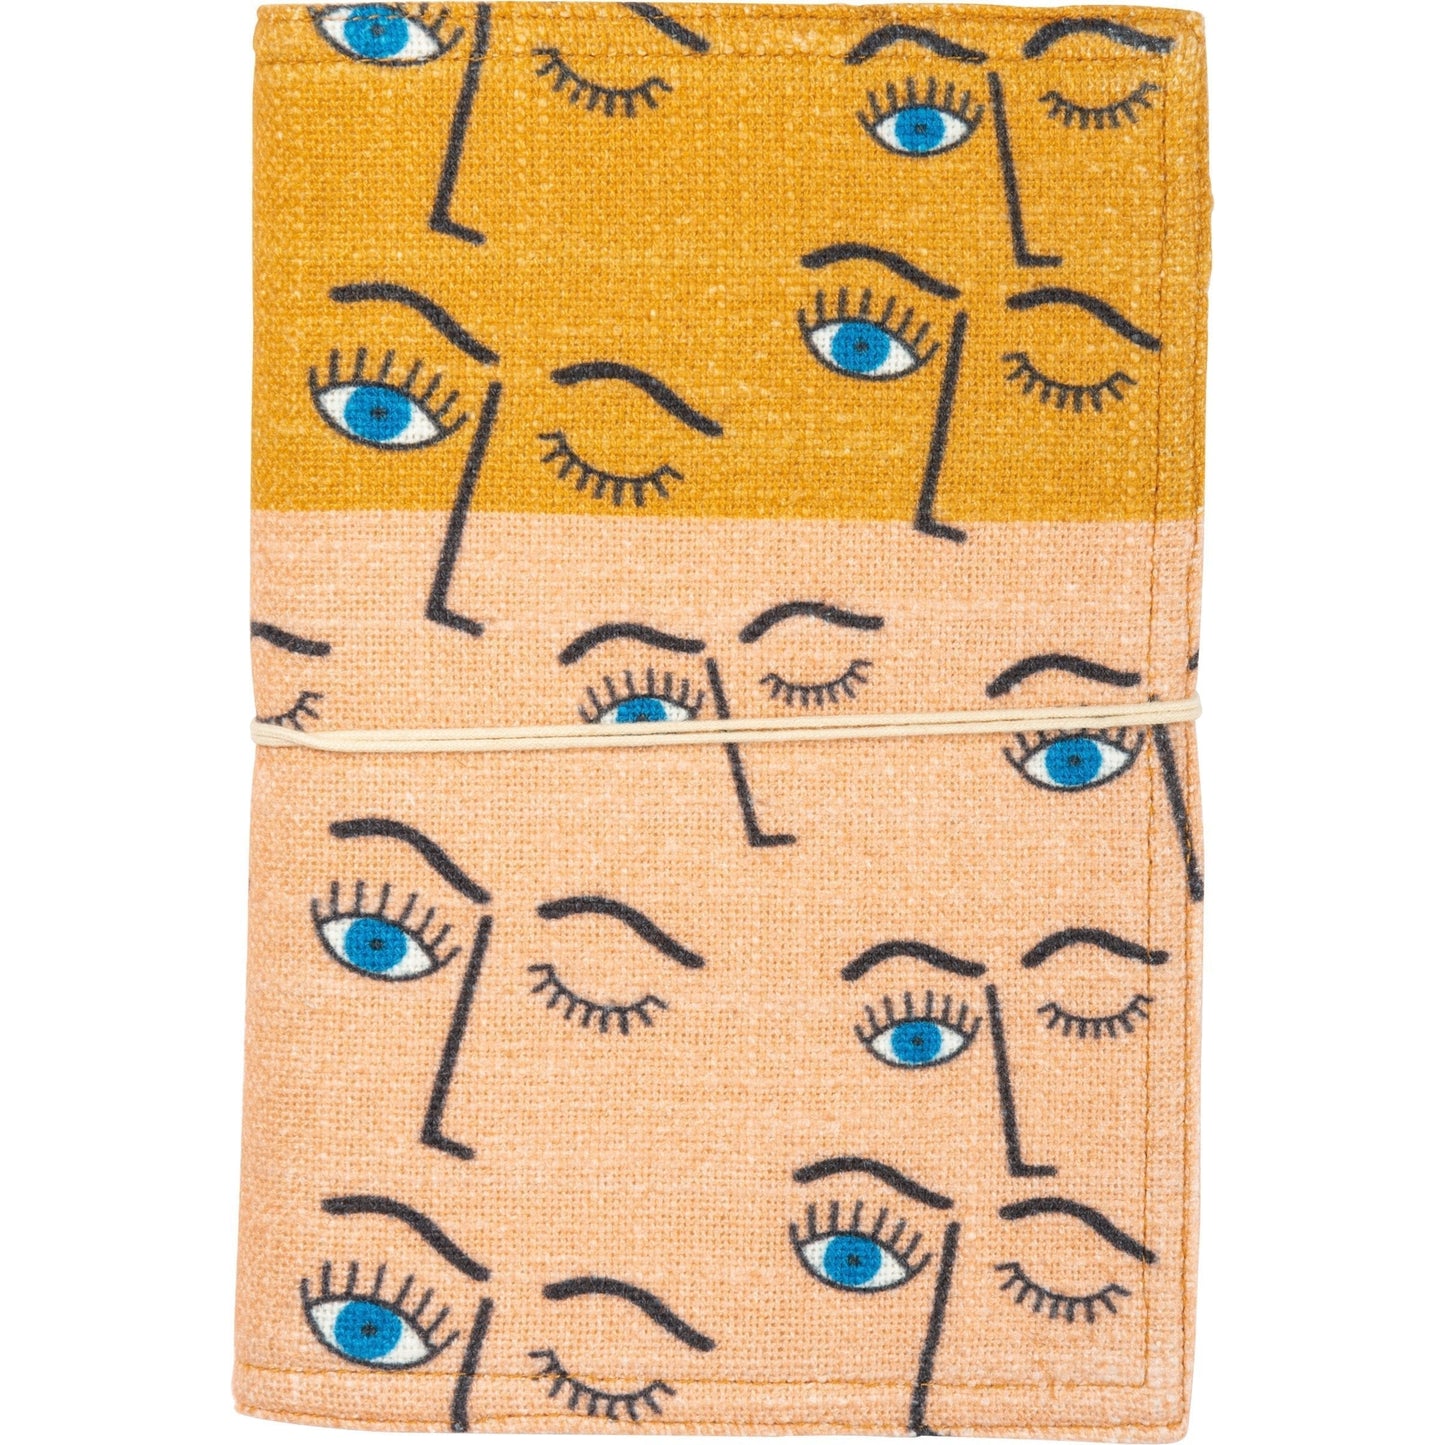 Winking Eye Fabric Covered Journal with Tie Closure | 1980s Memphis-Inspired Design